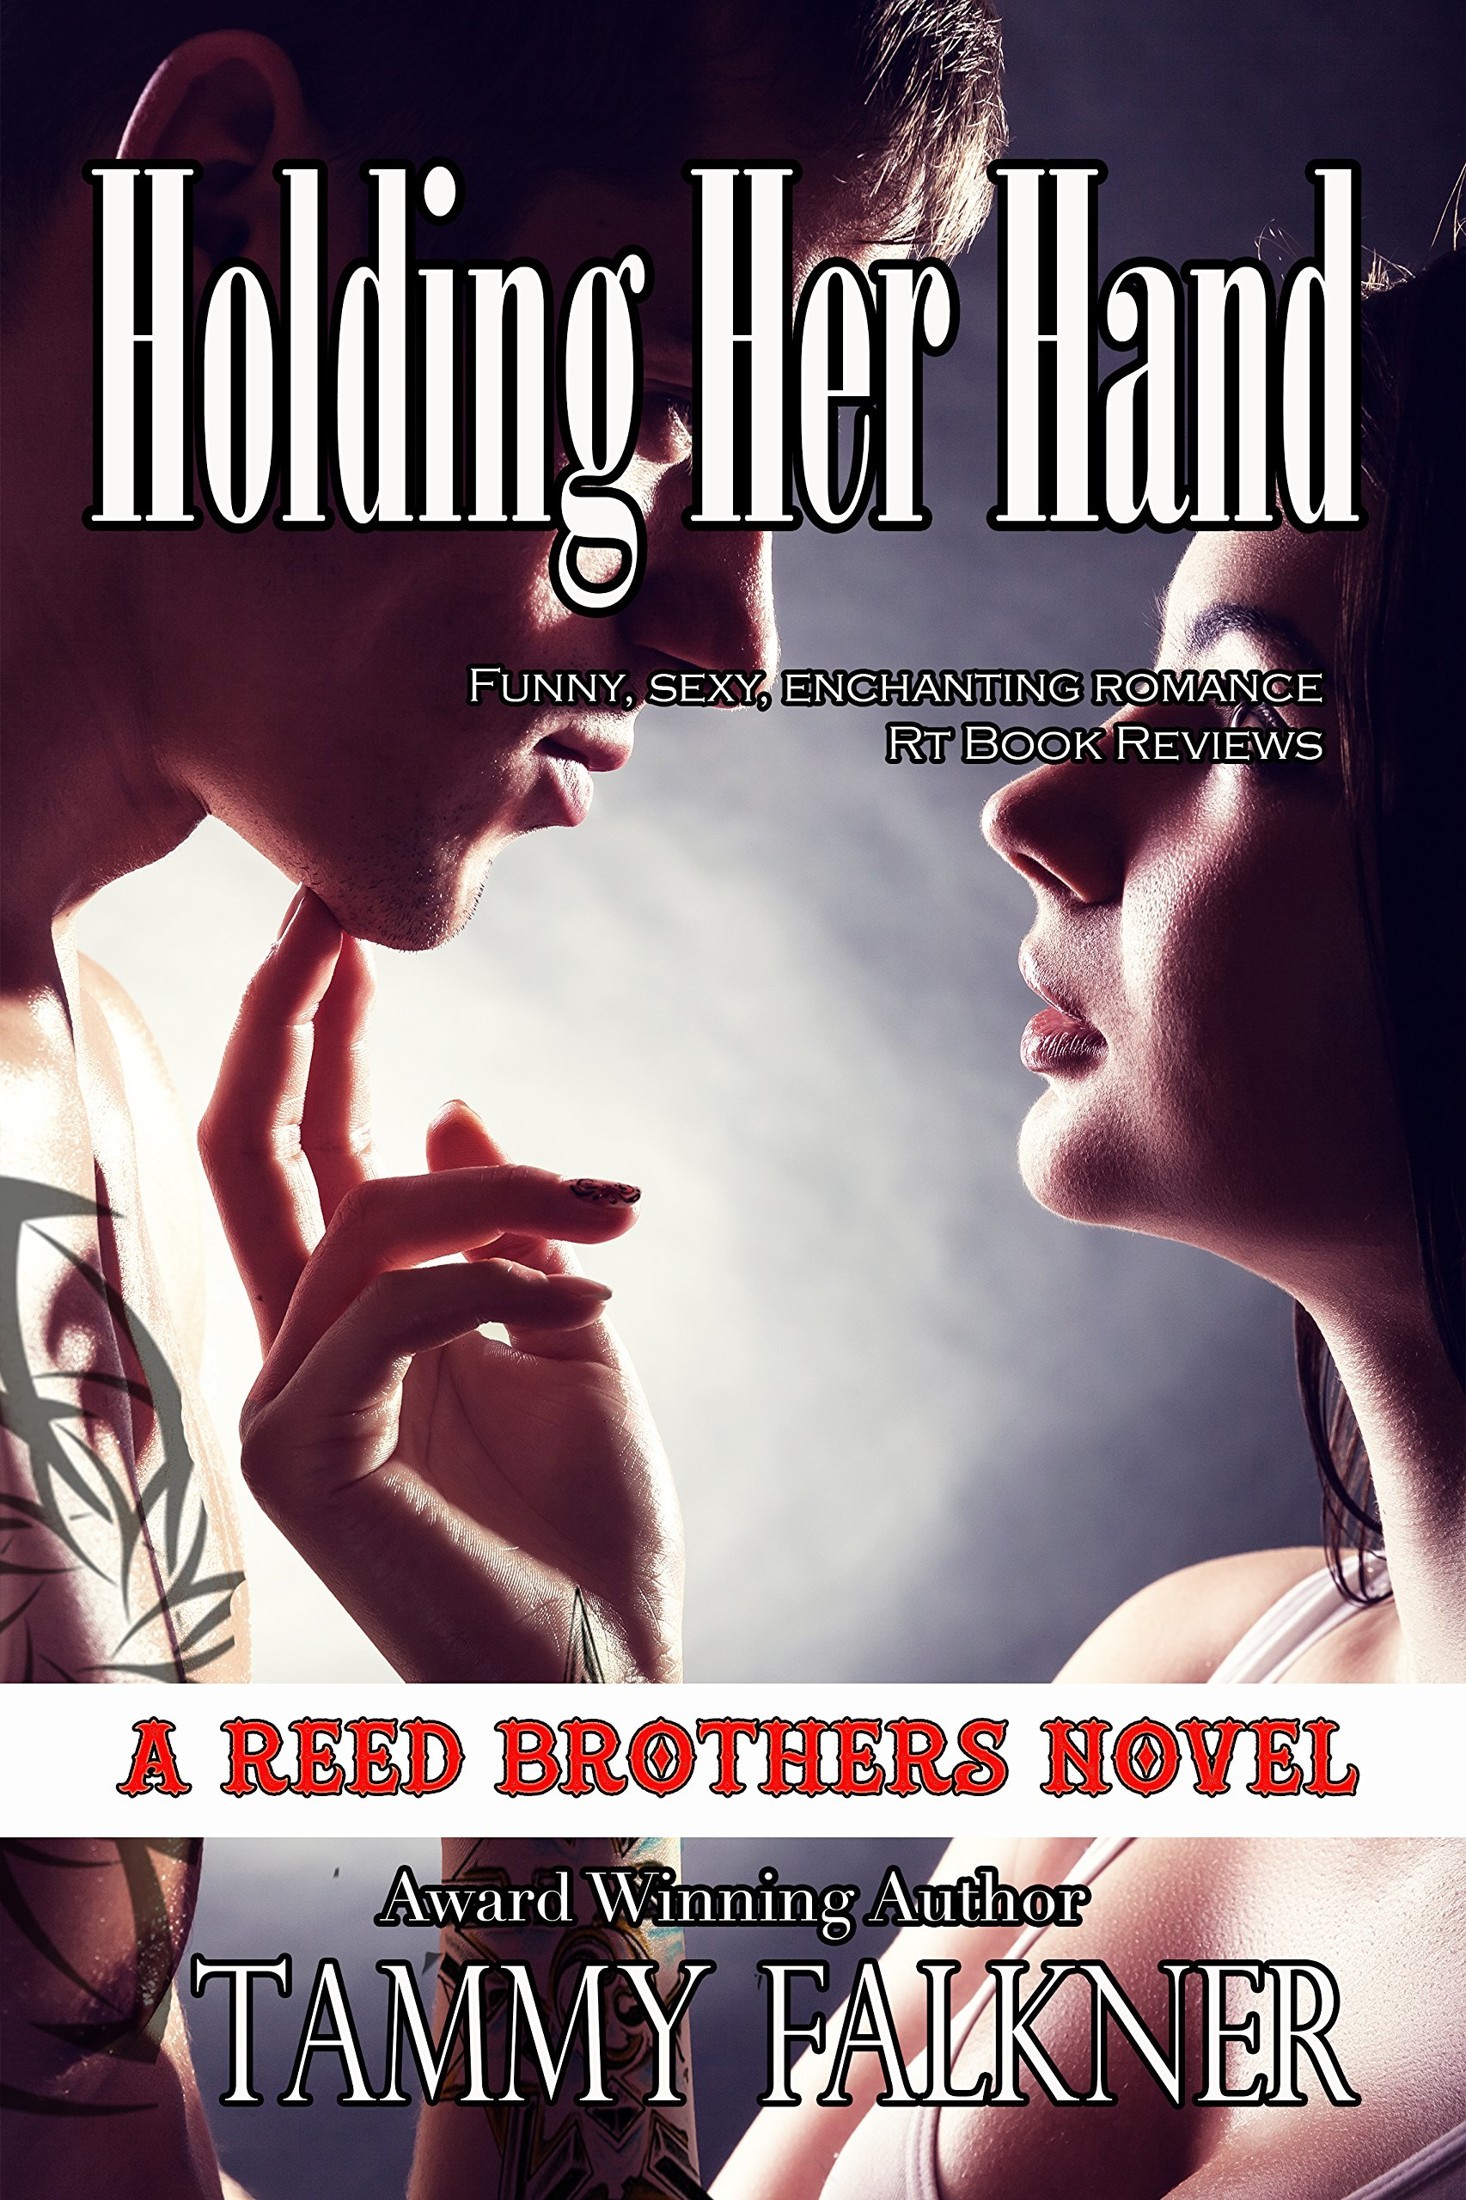 Holding Her Hand (Reed Brothers Book 15) by Tammy Falkner